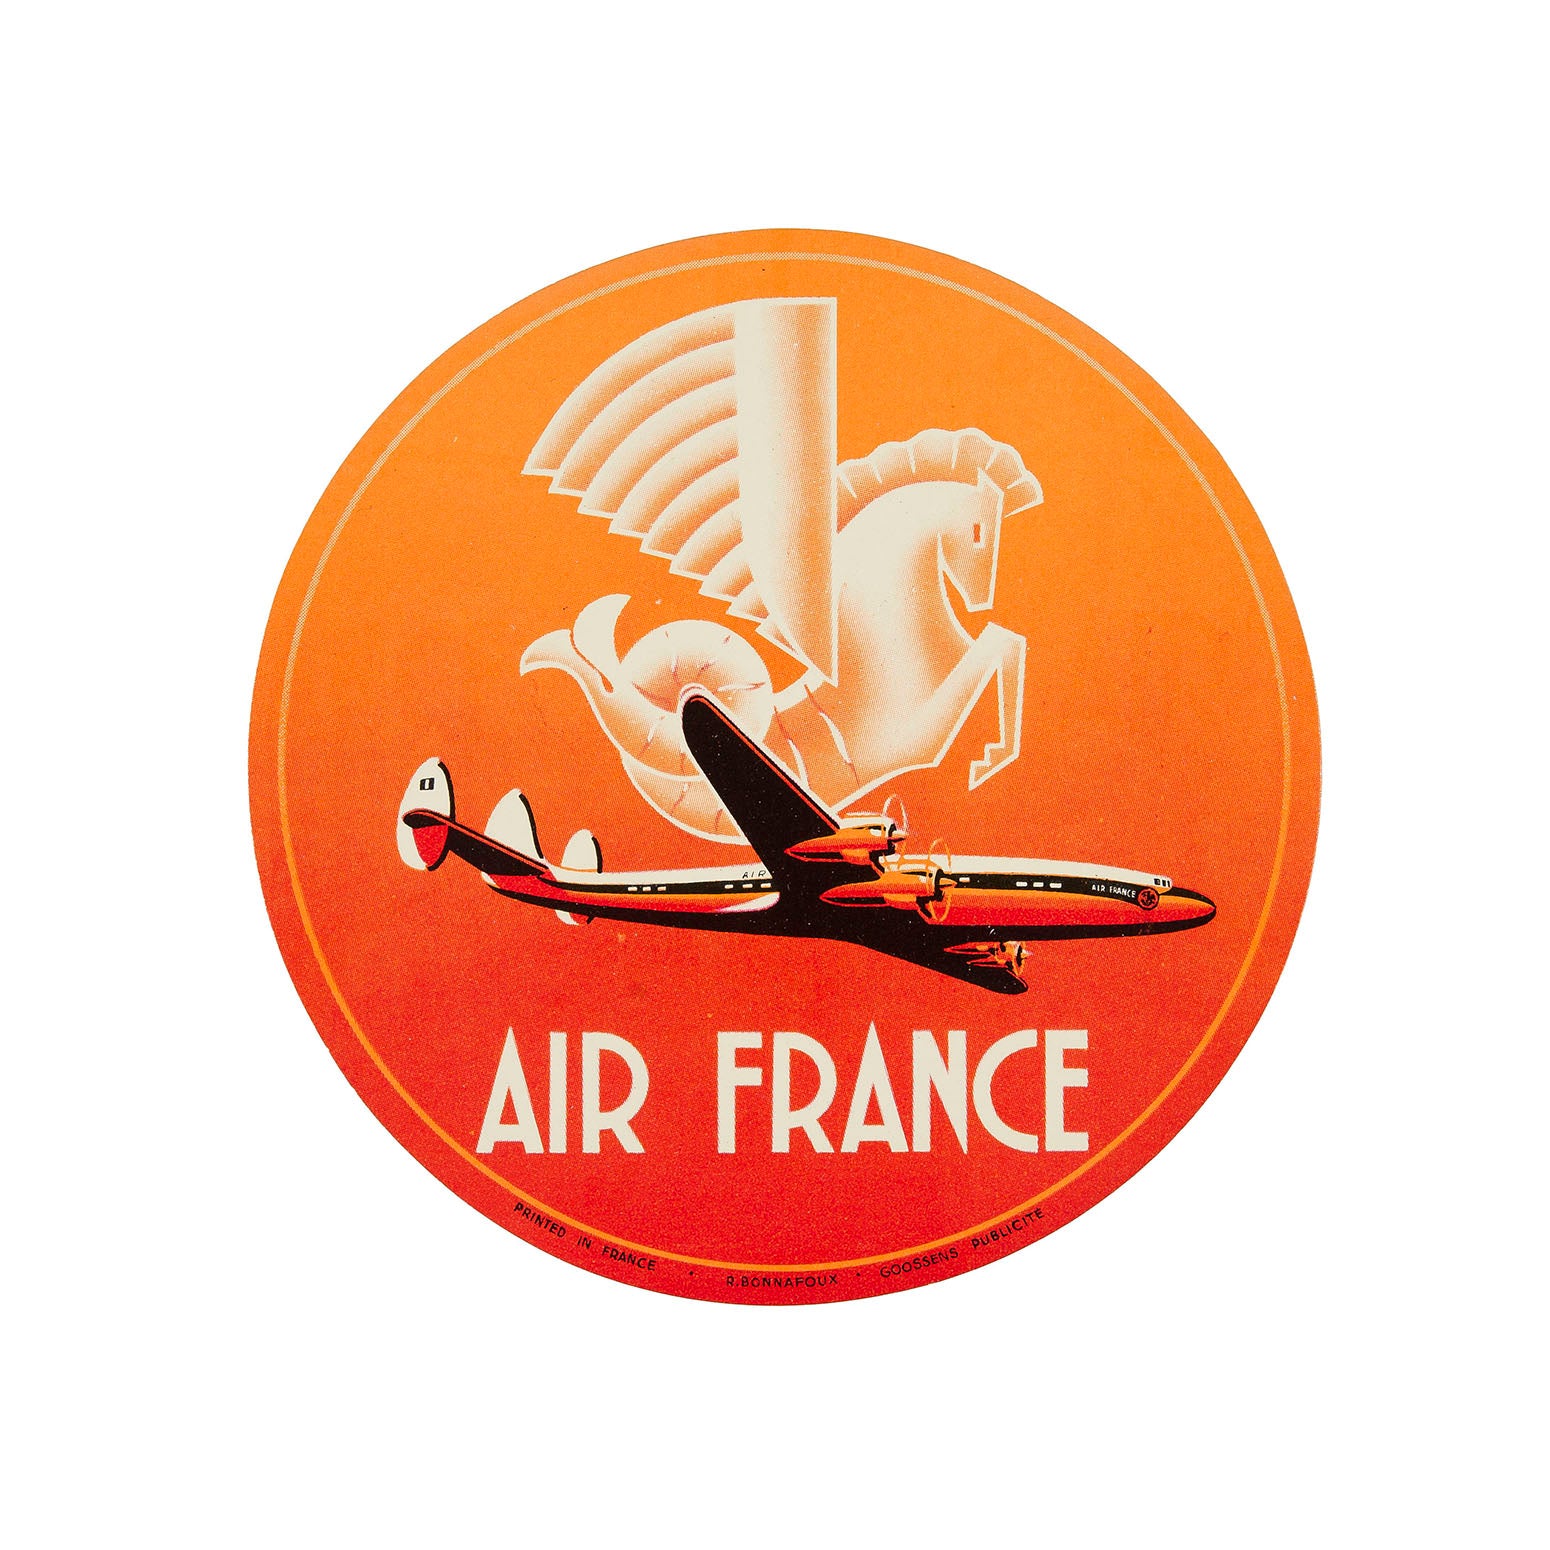 Air France (Luggage Label)